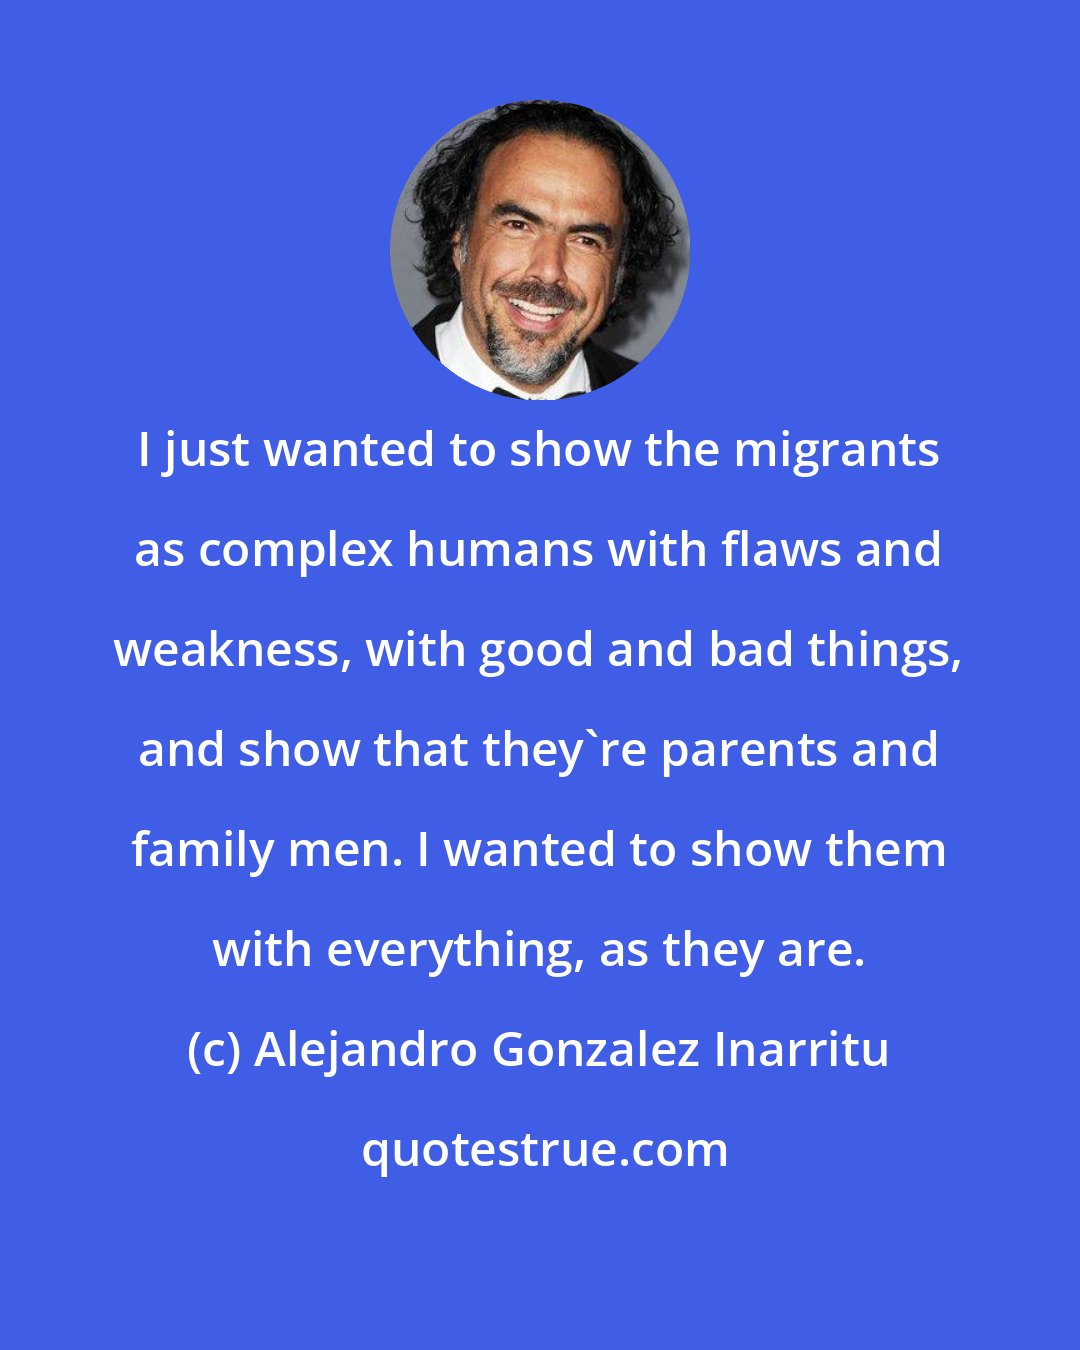 Alejandro Gonzalez Inarritu: I just wanted to show the migrants as complex humans with flaws and weakness, with good and bad things, and show that they're parents and family men. I wanted to show them with everything, as they are.